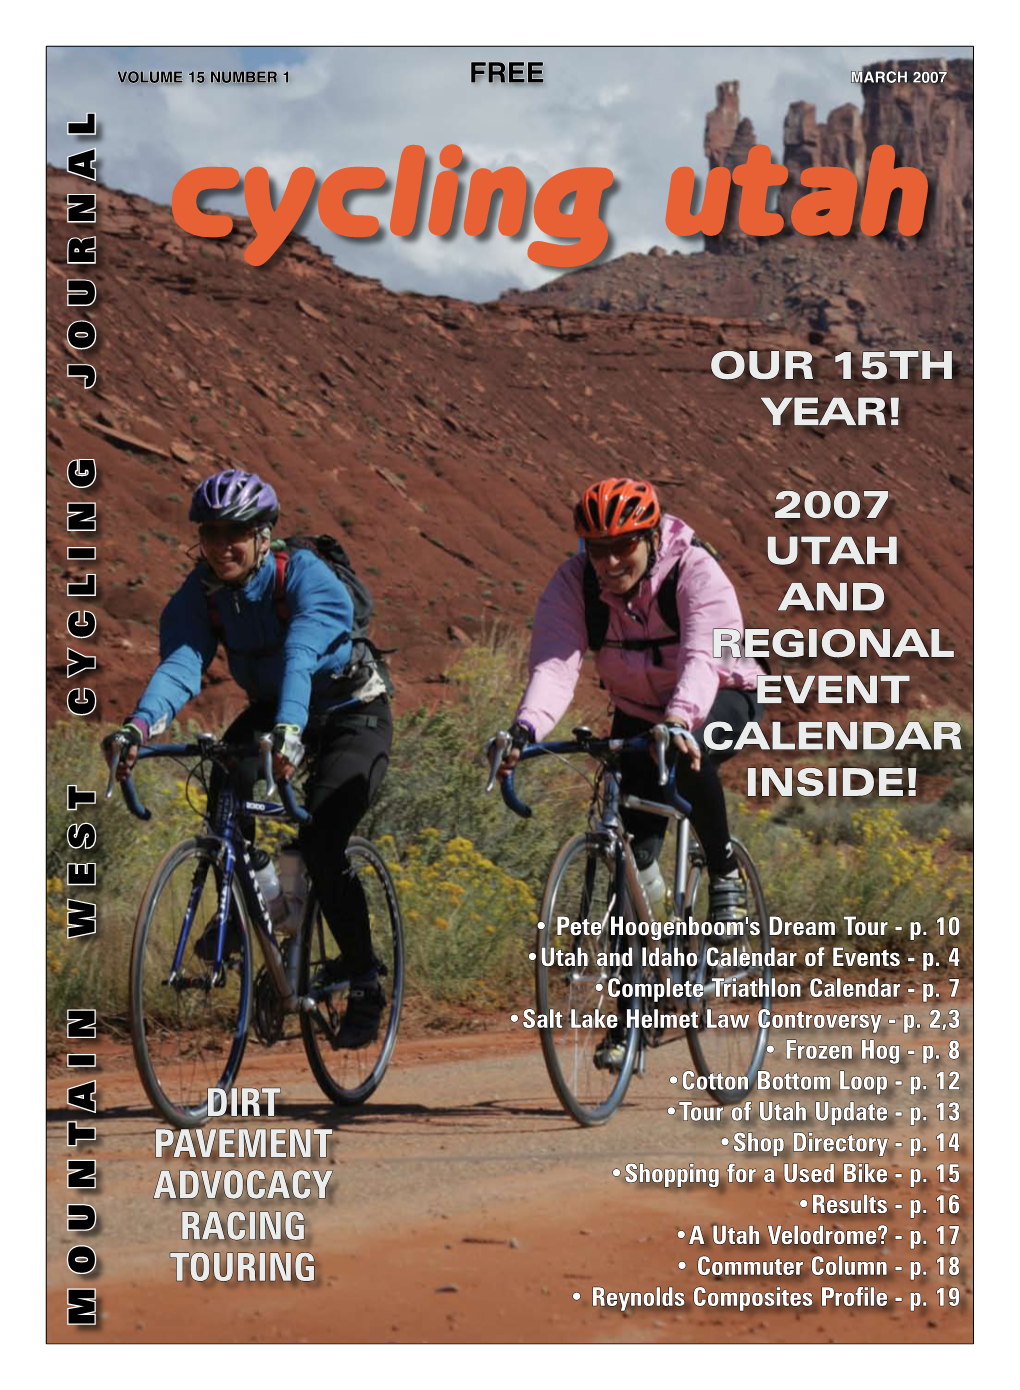 March 2007 Issue